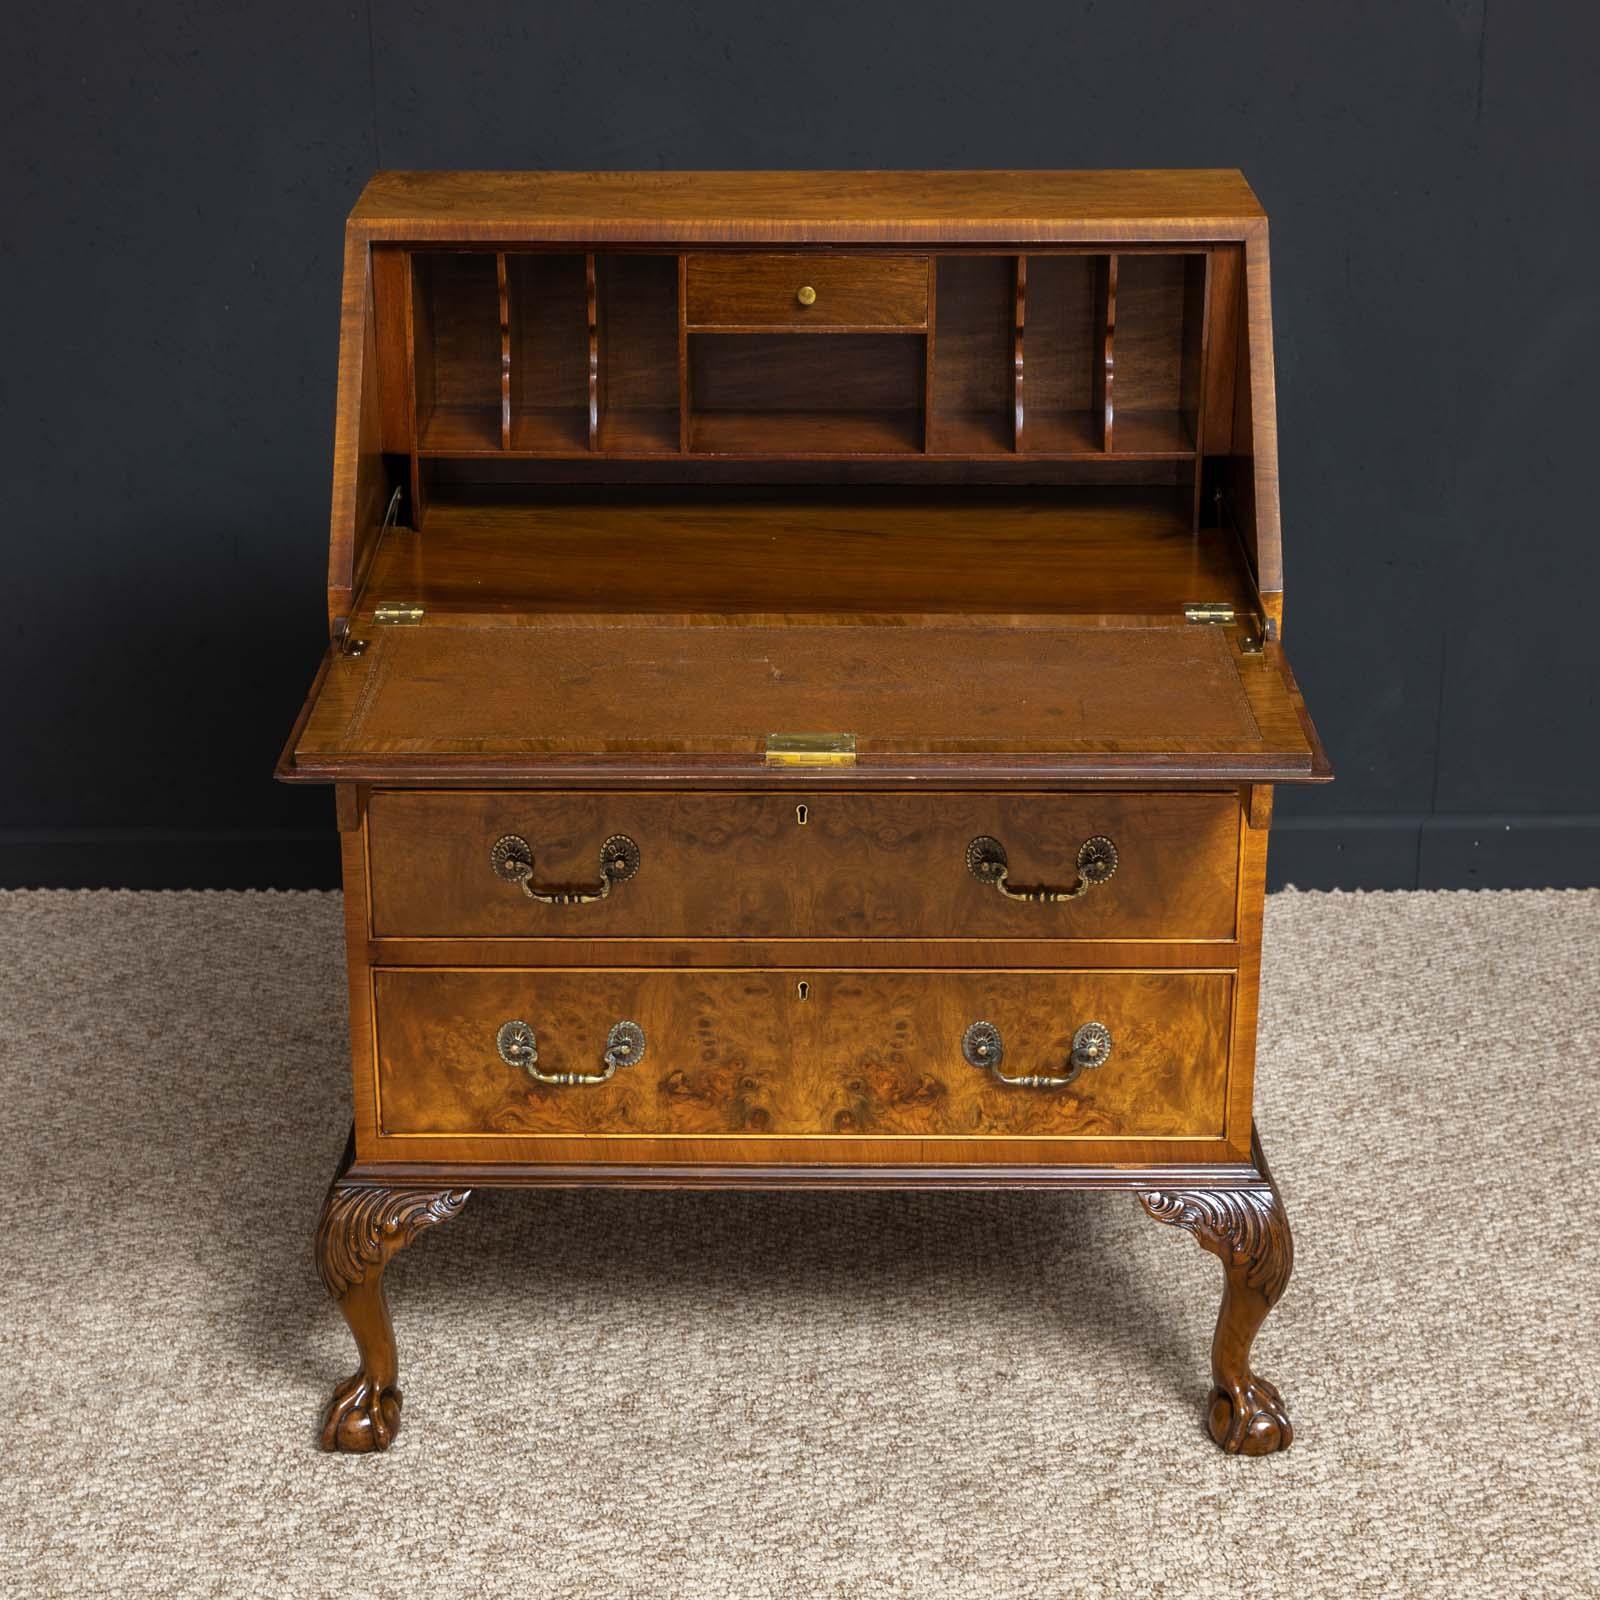 A good walnut bureau in the mid-18th century style. Sat on bold cabriole legs with acanthus carvings to the shoulders and finished on ball and claw feet. The burr walnut faced drawers have top quality cast brass swan neck handles and working locks